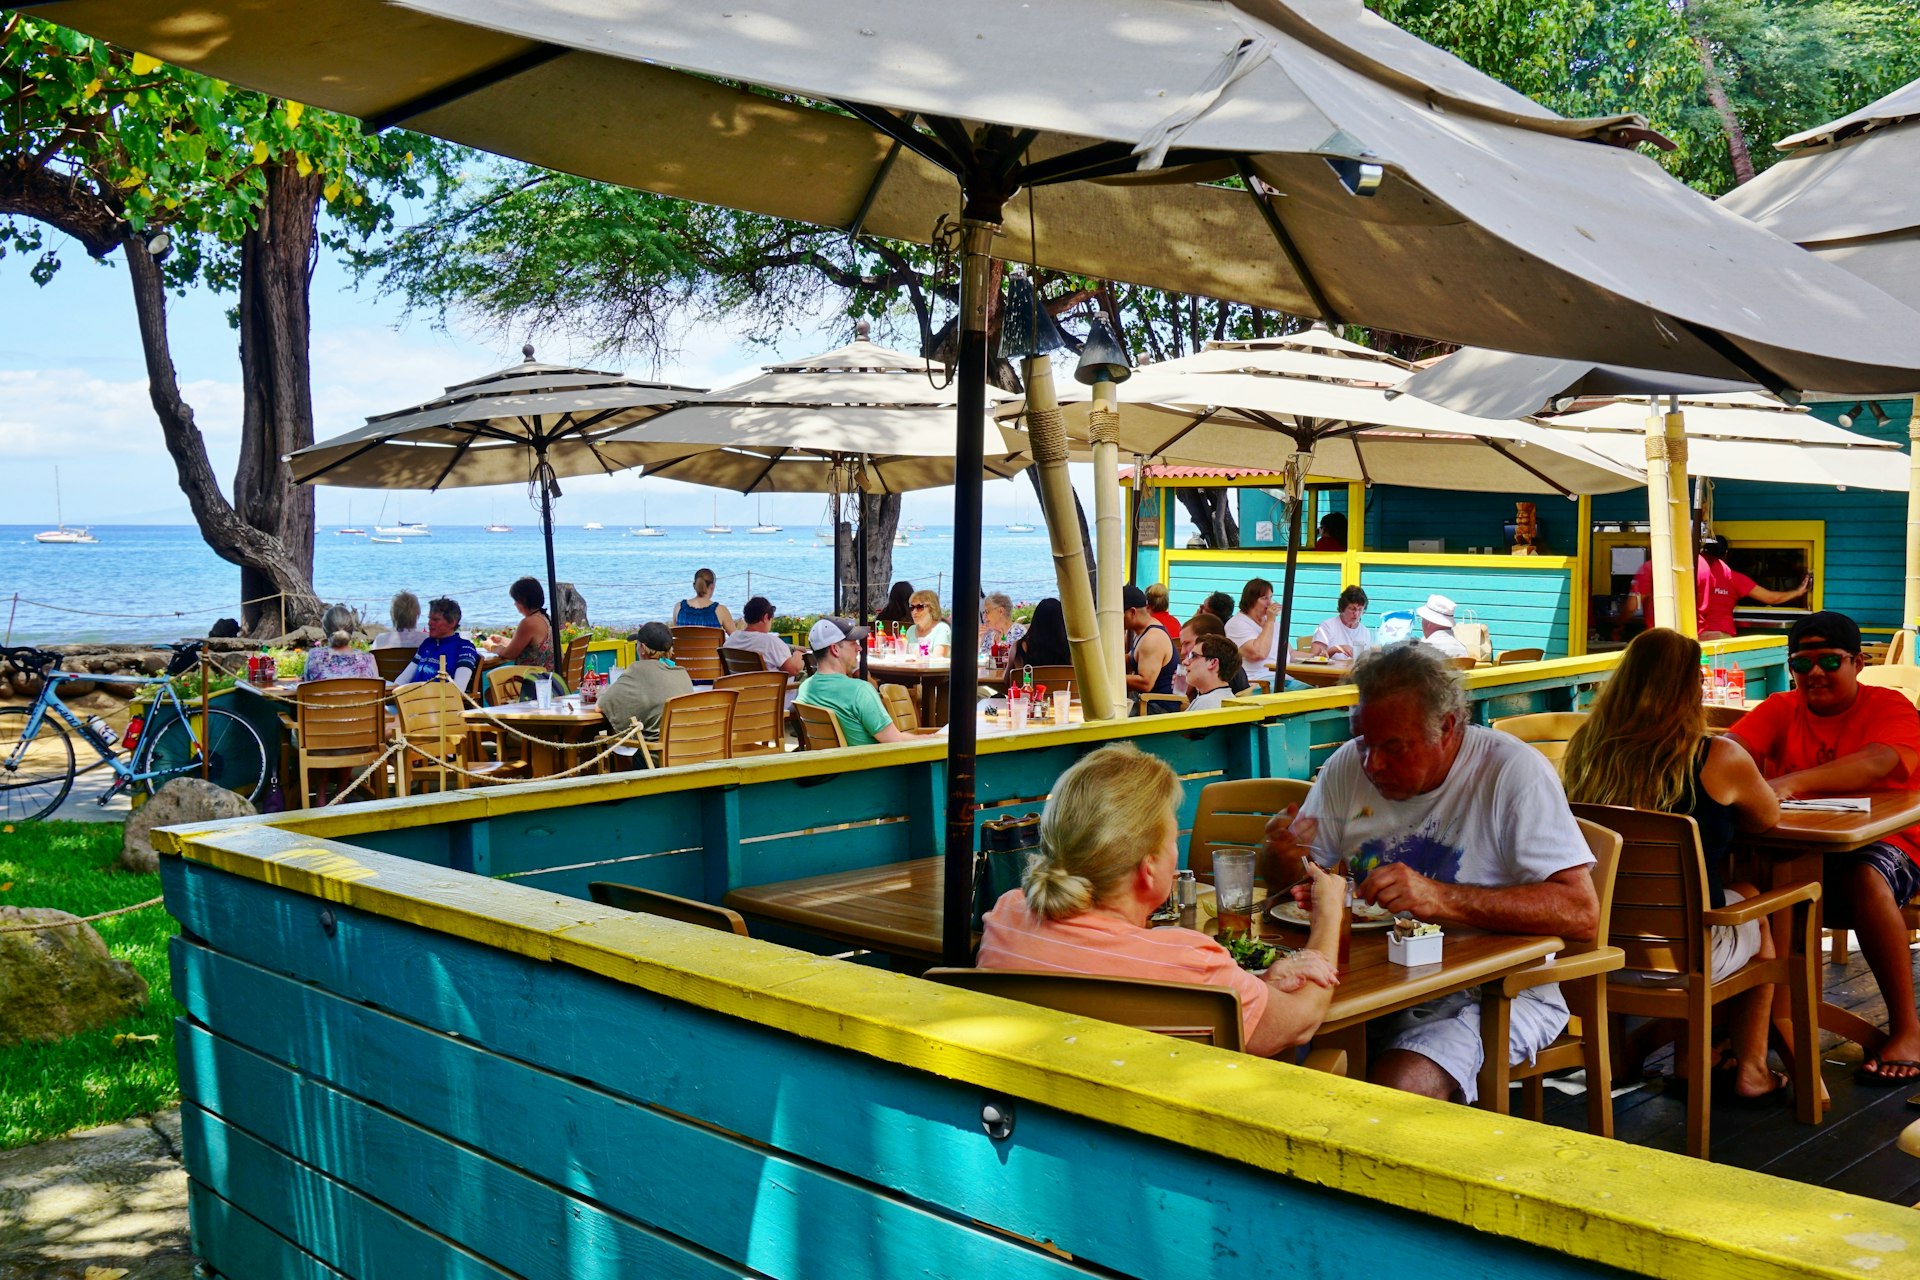 Aloha Mixed Plate, a popular beachside barbecue restaurant overlooking the beach in Lahaina